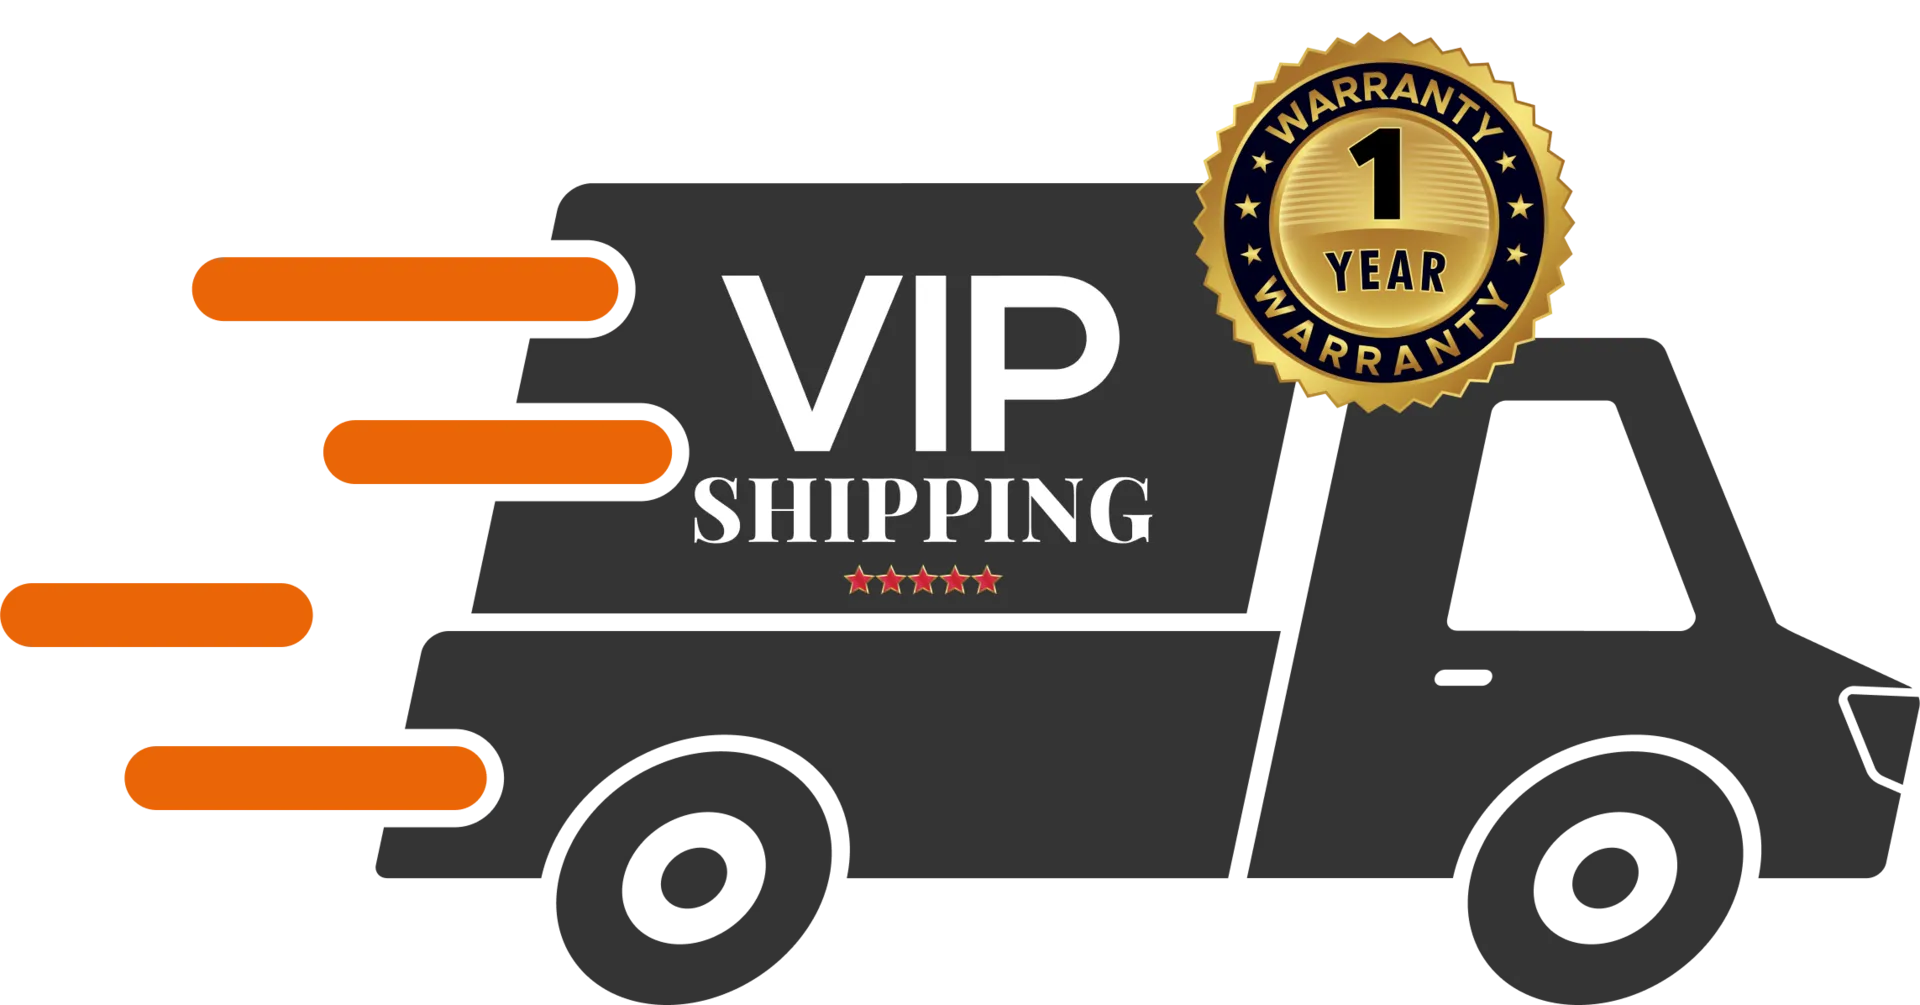 The VIP shipping + 1-year Product Warranty